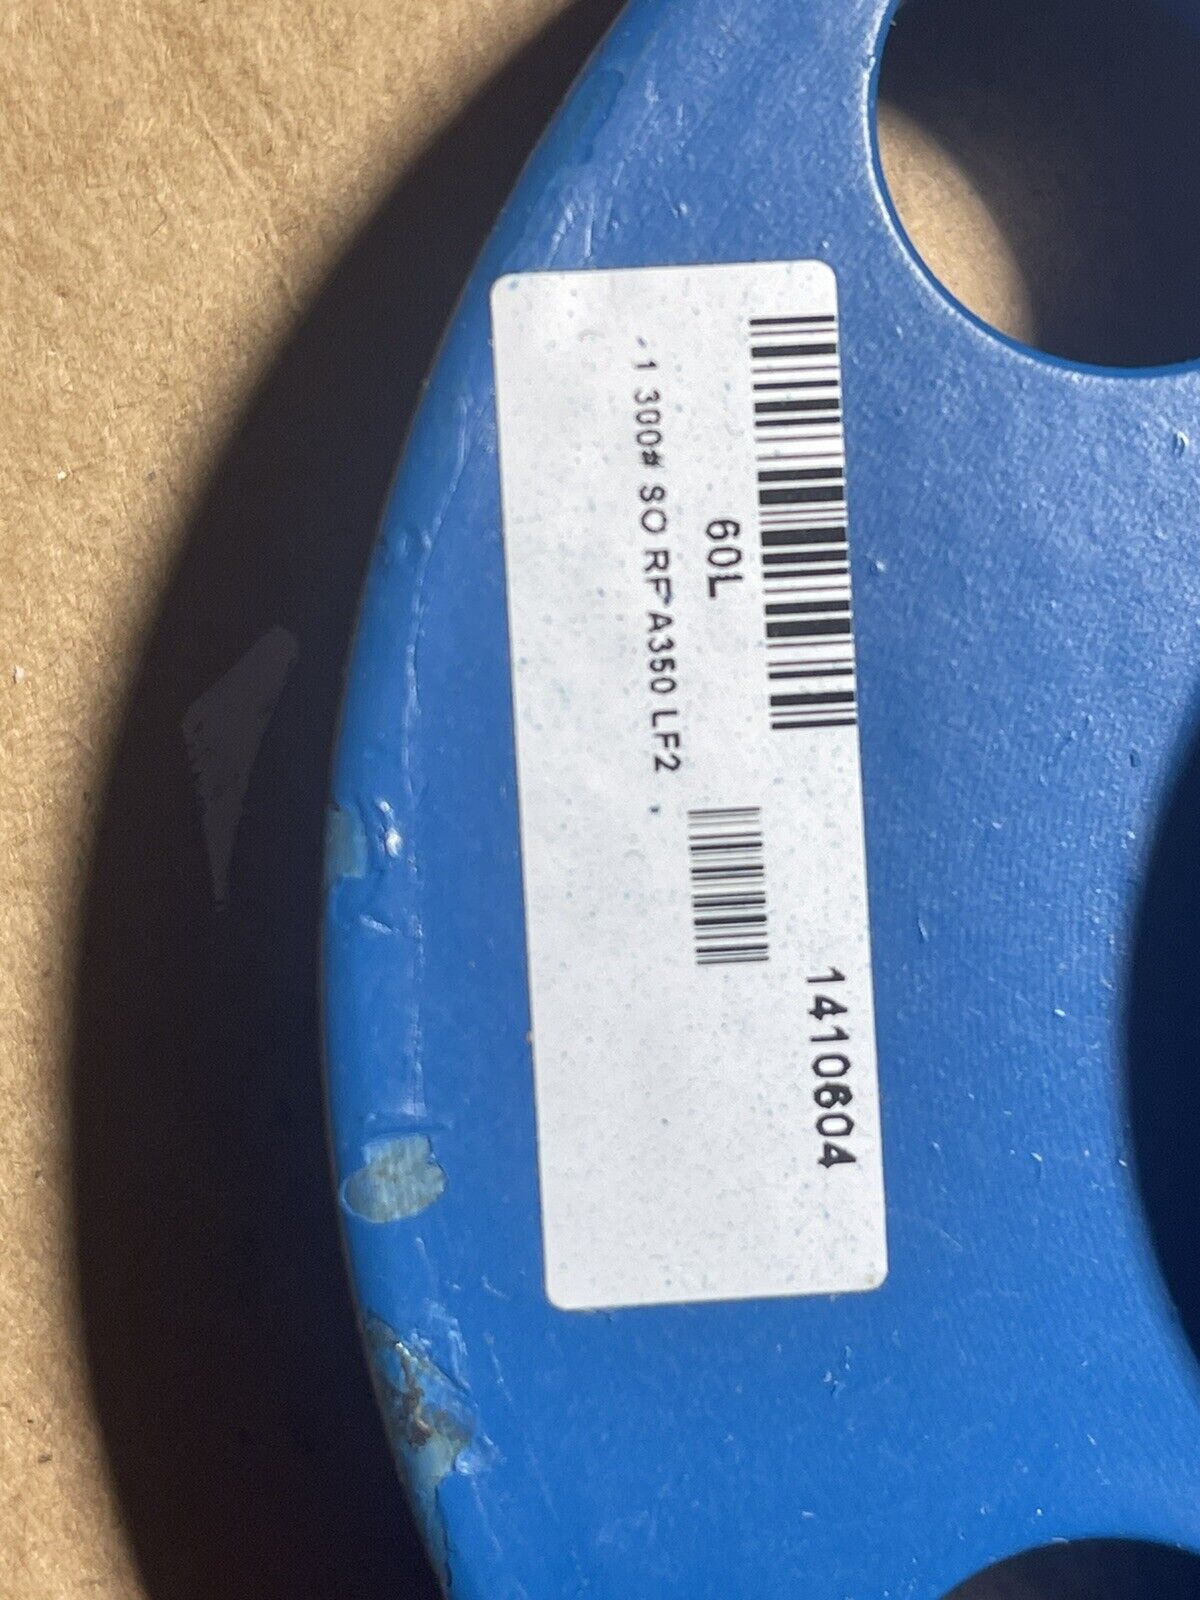 1" SLIP ON FLANGE, CLASS 300, ASTM A350 LF2 FOR LOW TEMPERATURE